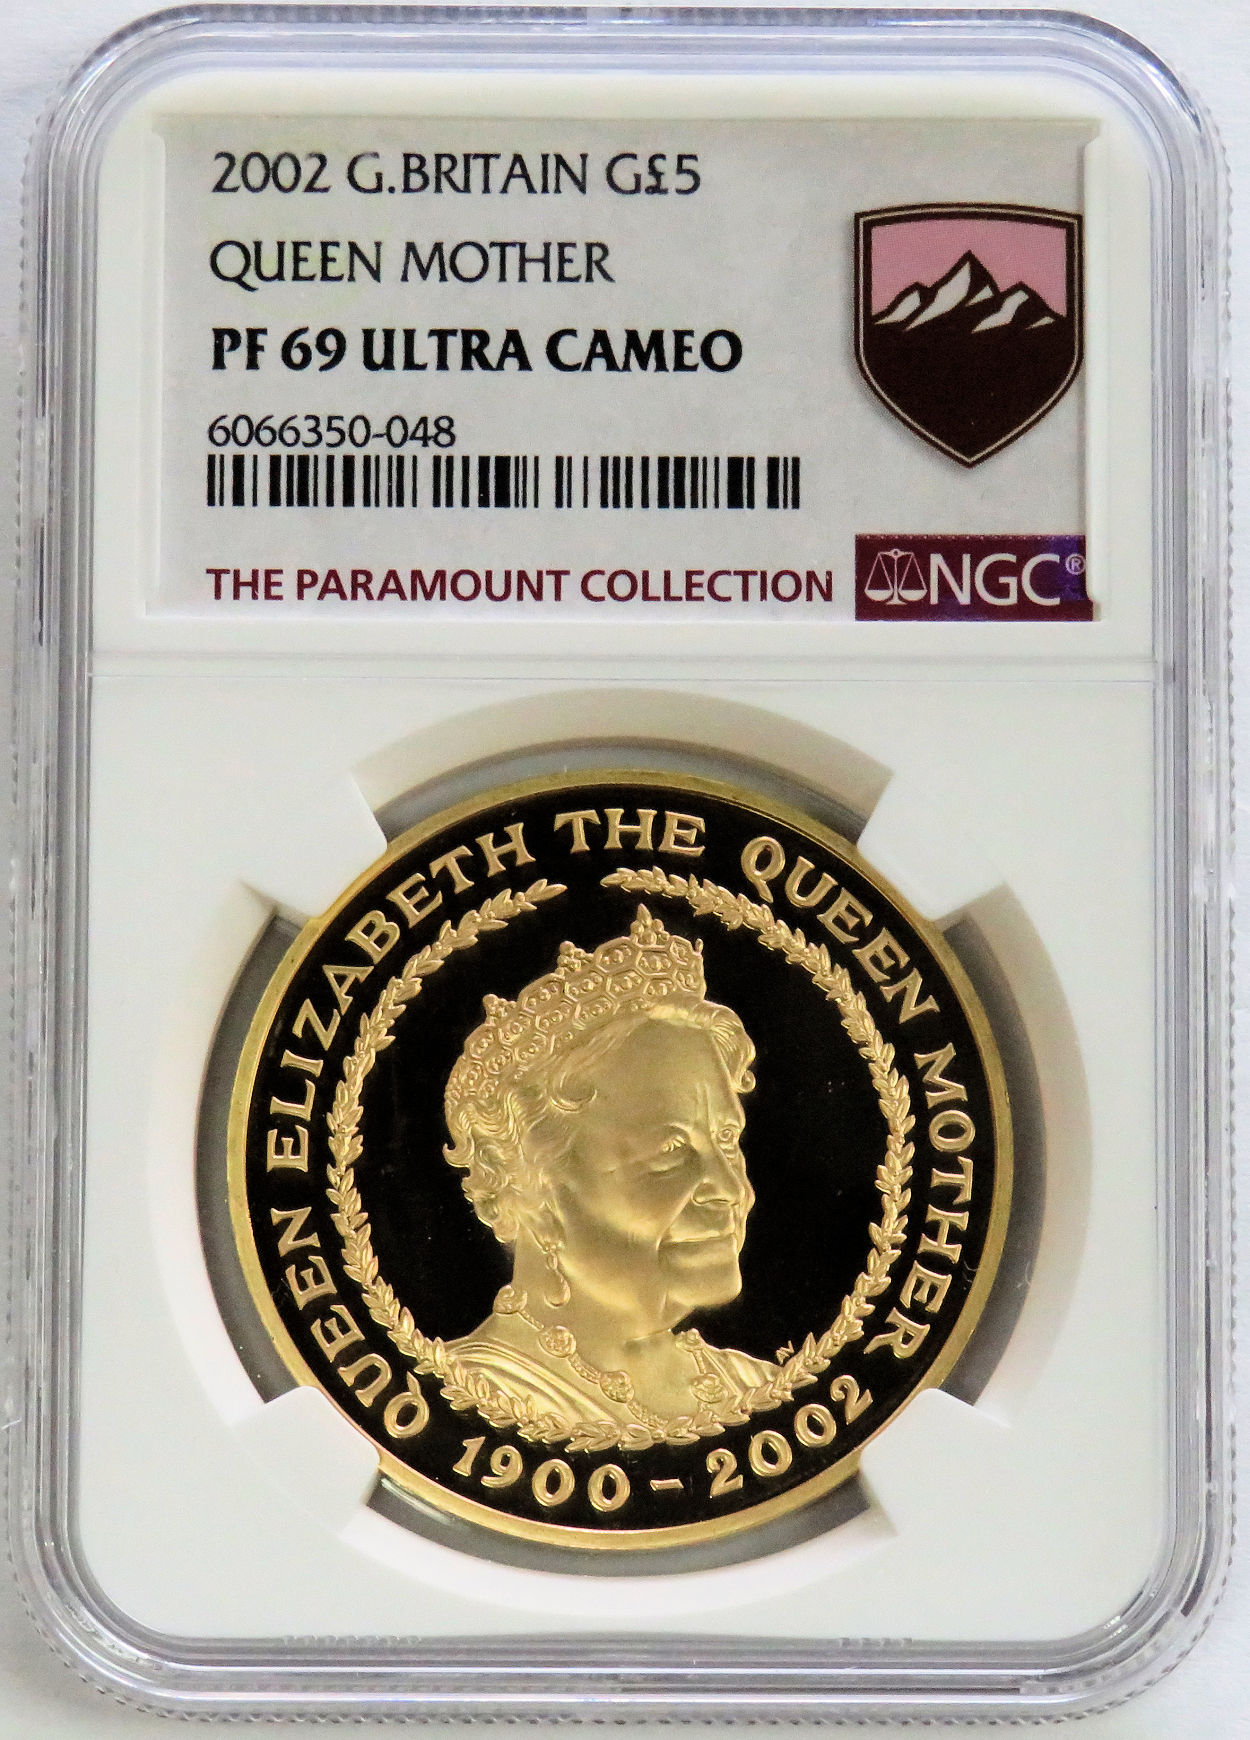 2002 GOLD GREAT BRITAIN 5 POUNDS SOVEREIGN QUEEN MOTHER PROOF COIN NGC PF 69 ULTRA CAMEO 2,086 MINTAGE